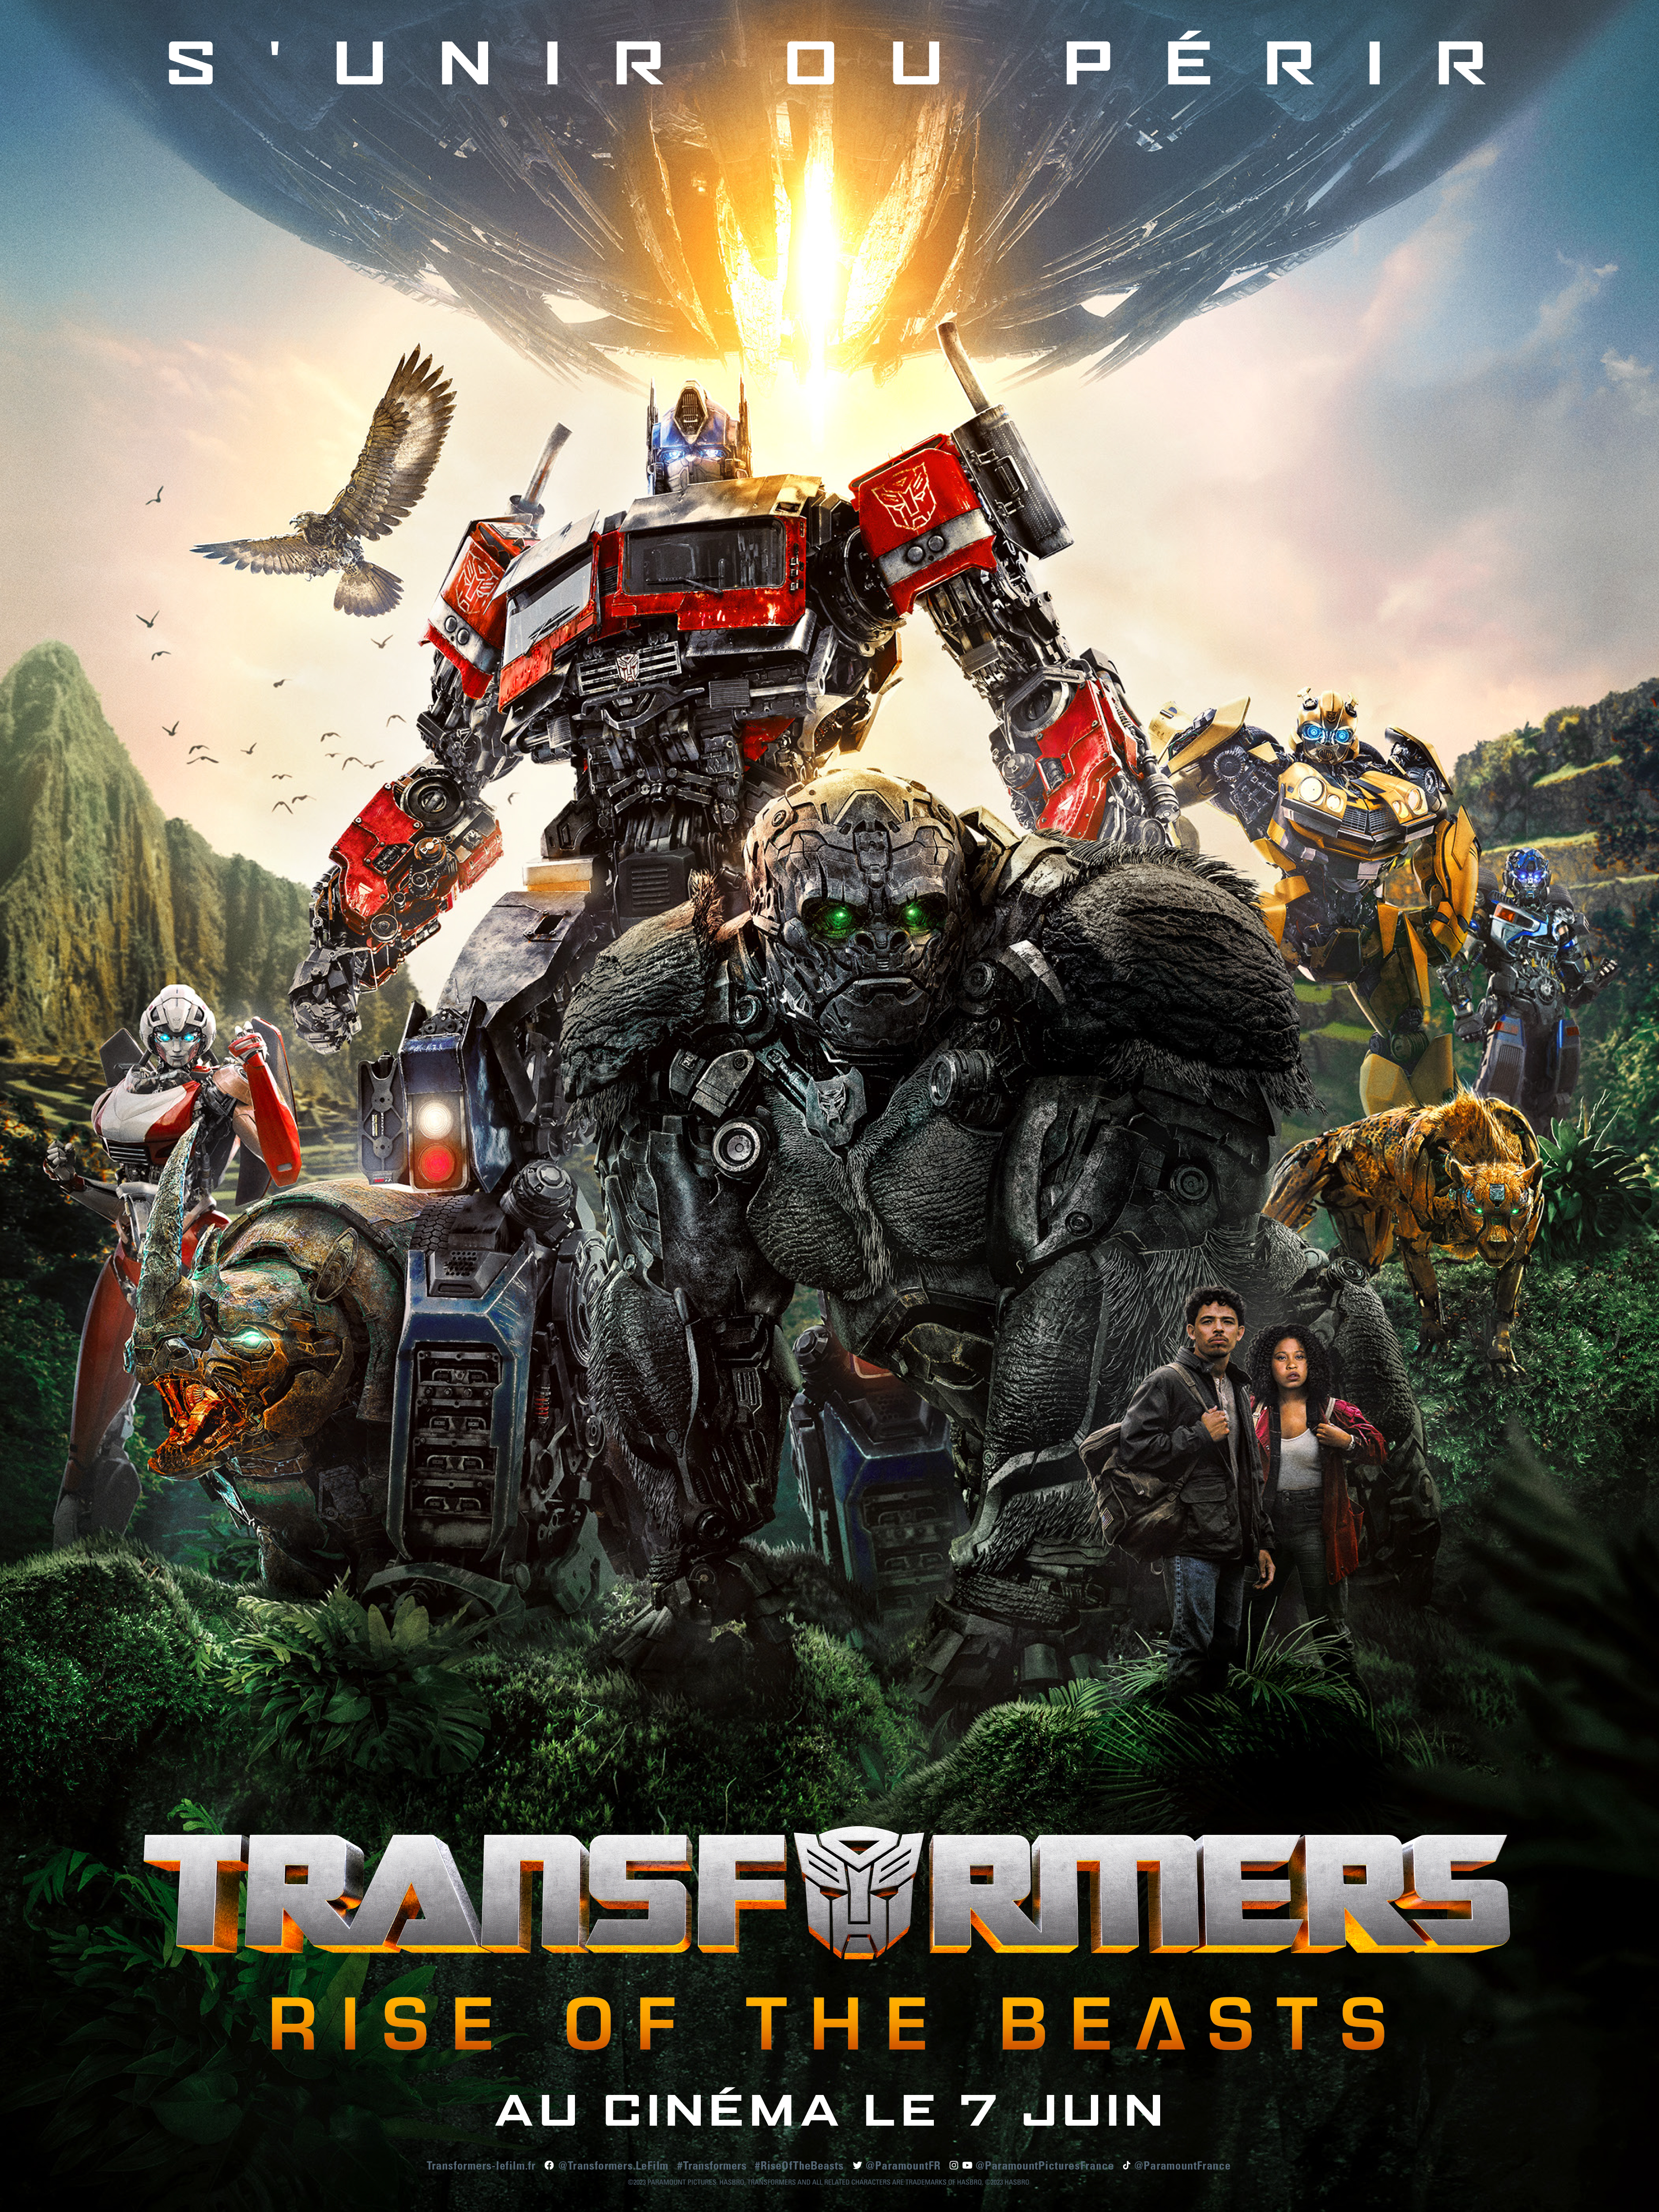 Transformers: Rise of the Beasts (3D)